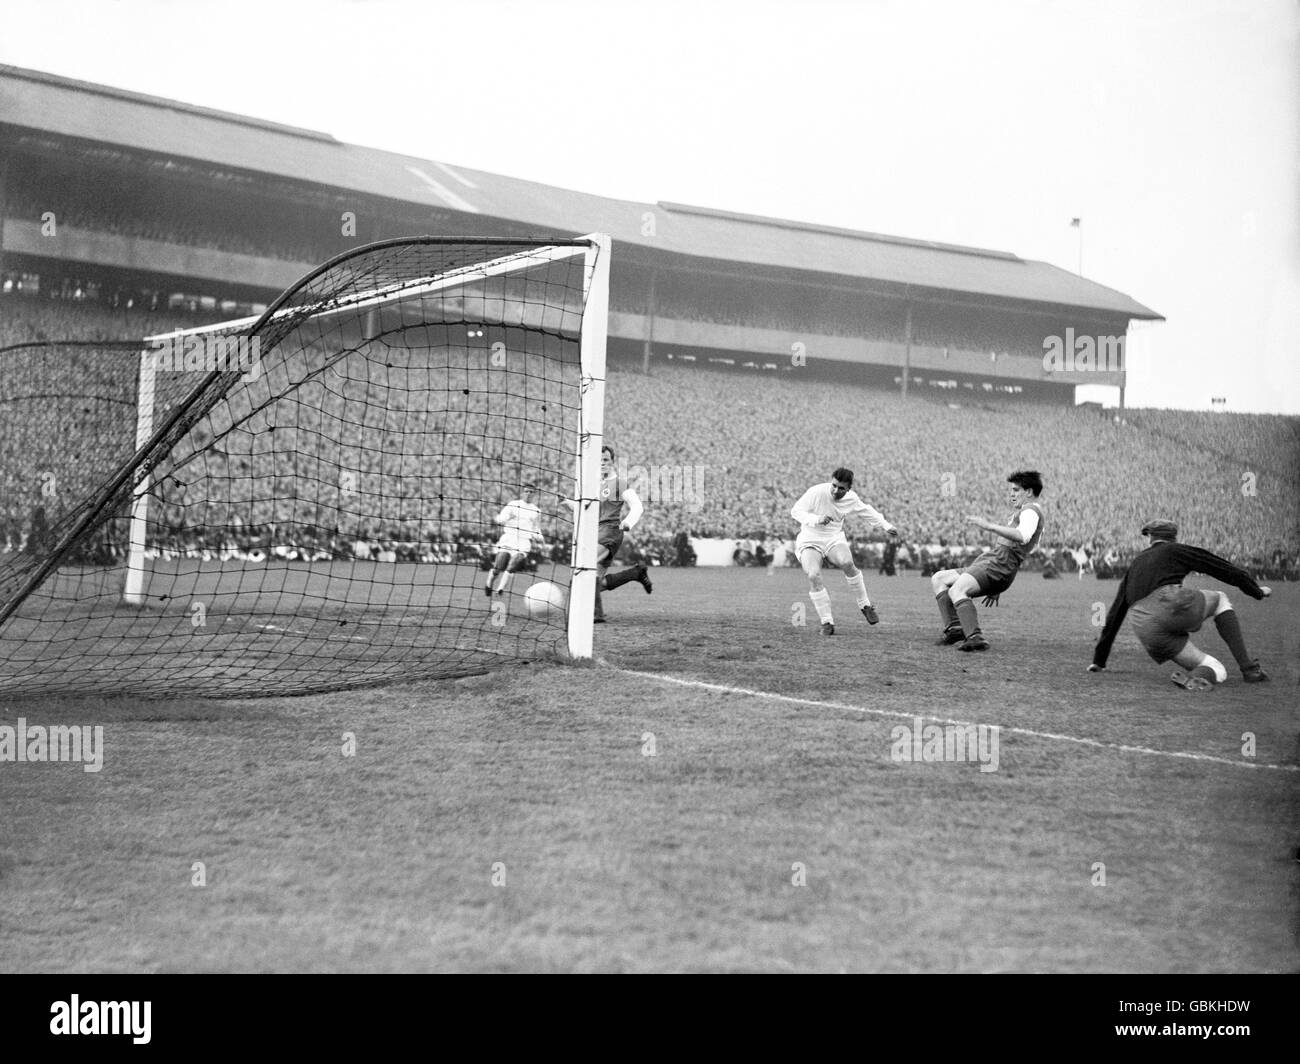 Real Madrid's Ferenc Puskas (third r) slots home his team's fifth goal, completing his hat-trick, as Eintracht Frankfurt goalkeeper Egon Loy (r) looks on helplessly Stock Photo